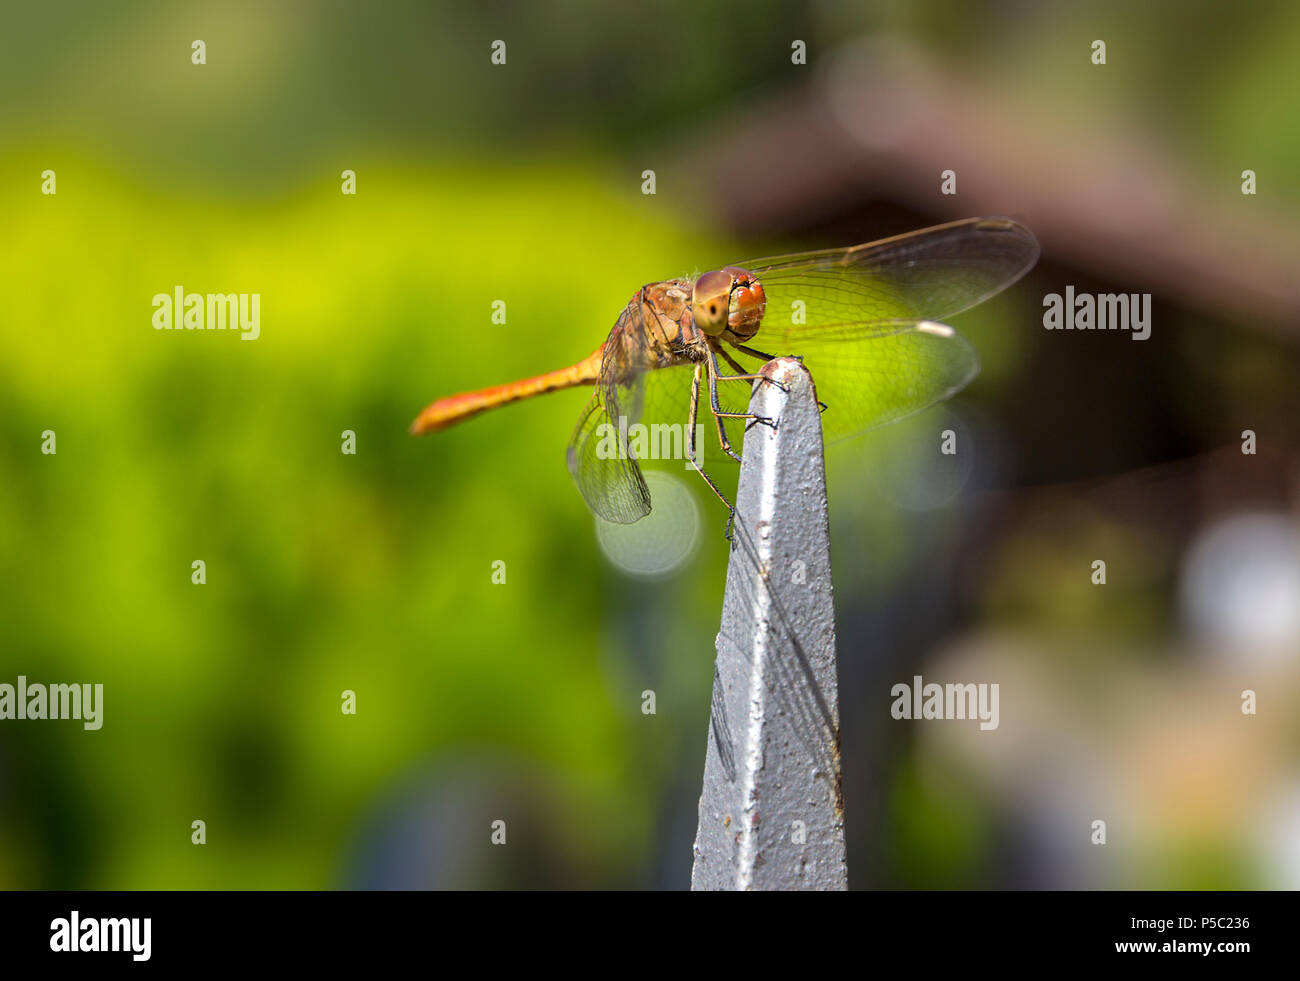 Beautiful dragonfly on the plant. Close up photo of a Dragonfly.A dragonfly is an insect belonging to the order Odonata, infraorder Anisoptera. Stock Photo